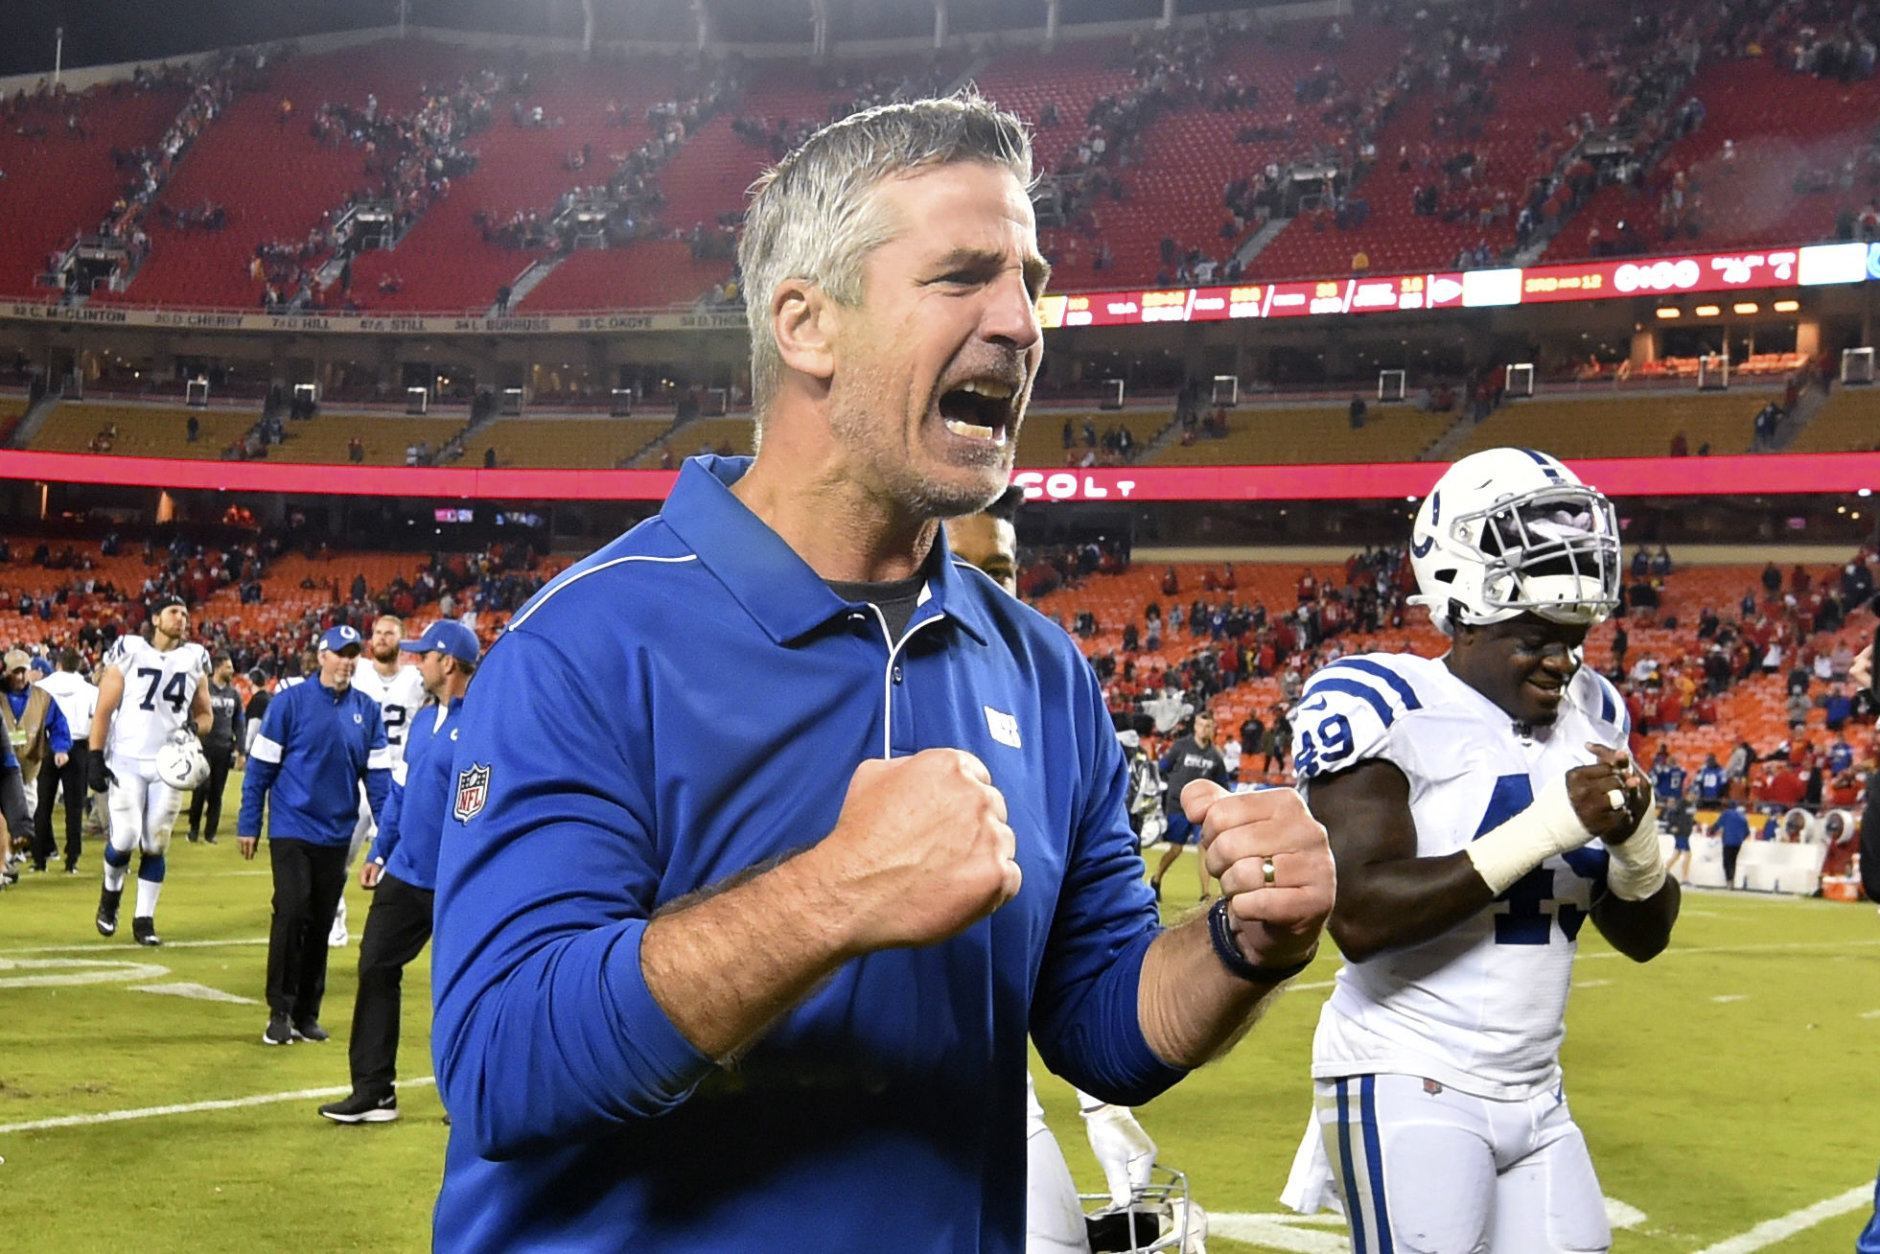 <p><b>Coach of the Year: Frank Reich</b></p>
<p>I give the former Maryland QB the slight edge over Sean Payton because his franchise QB retired days before the start of the season, yet Indianapolis remains in the mix for a division title, and maybe more.</p>
<p><i>Honorable mention: Sean Payton, Kyle Shanahan, Bill Belichick</i></p>
